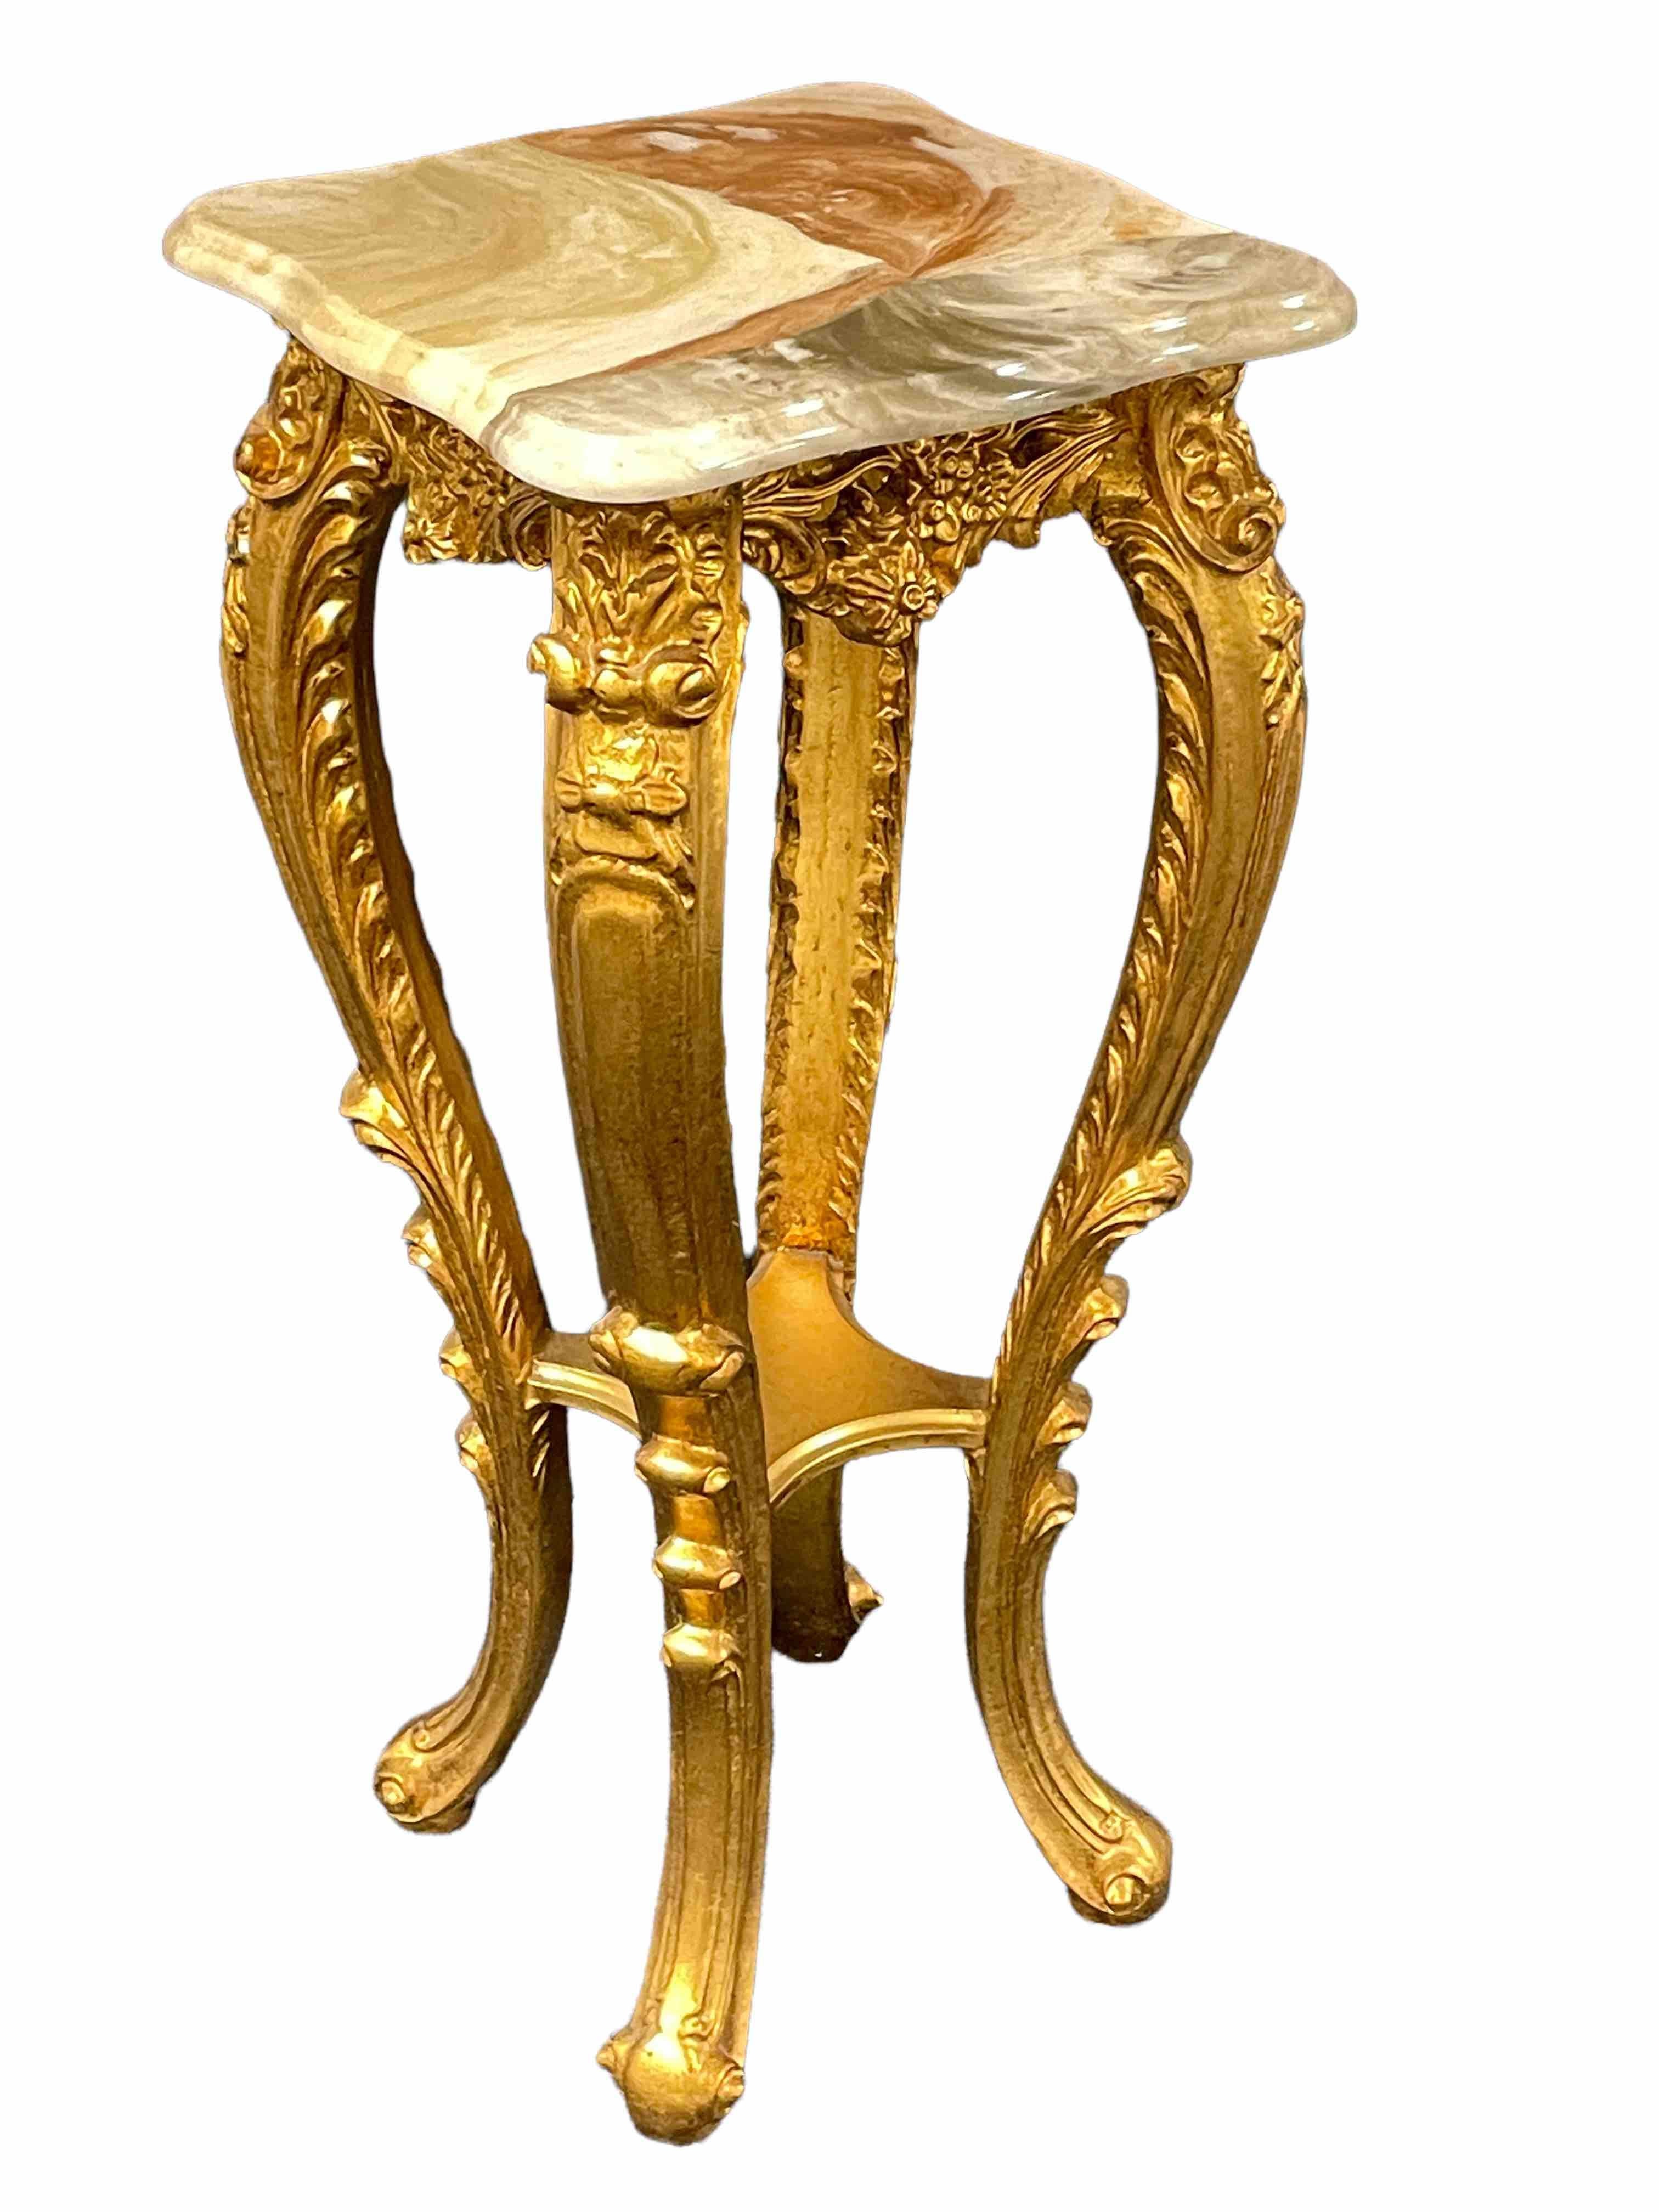 20th Century Carved Gilt Wood Toleware Console Pedestal Table, Italy For Sale 6